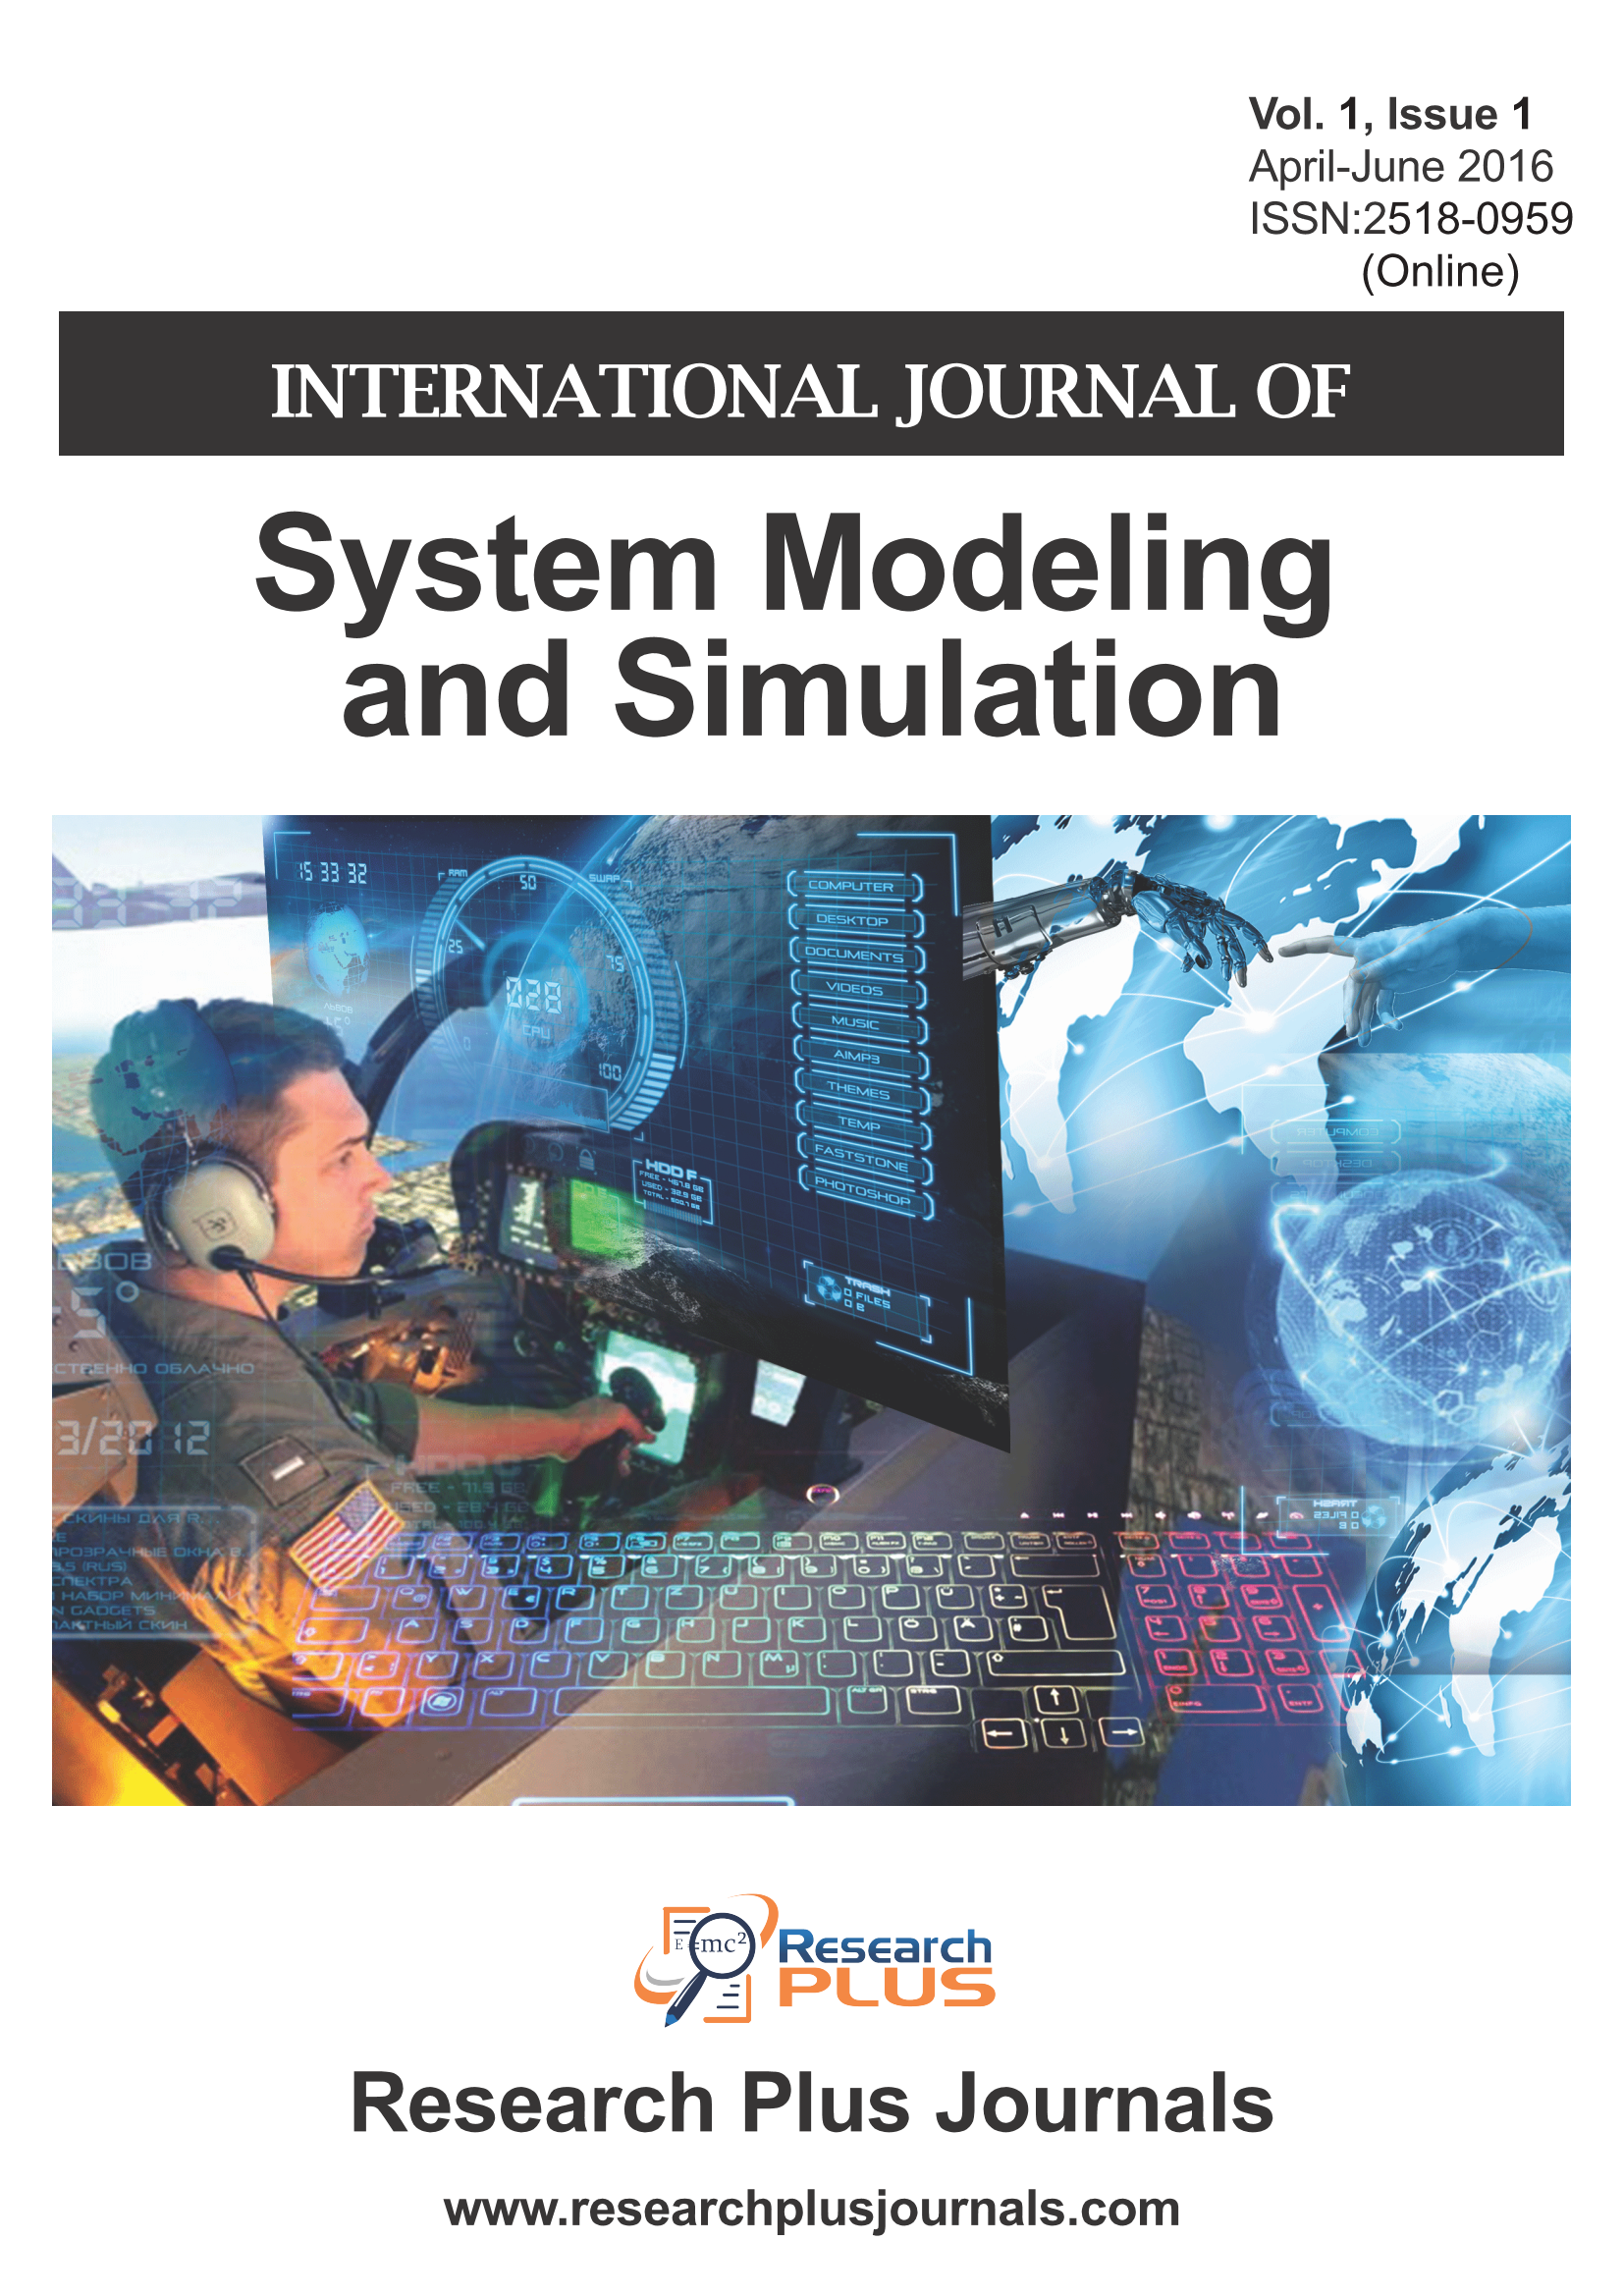 International Journal of System Modeling and Simulation (ISSN Online: 2518-0959)